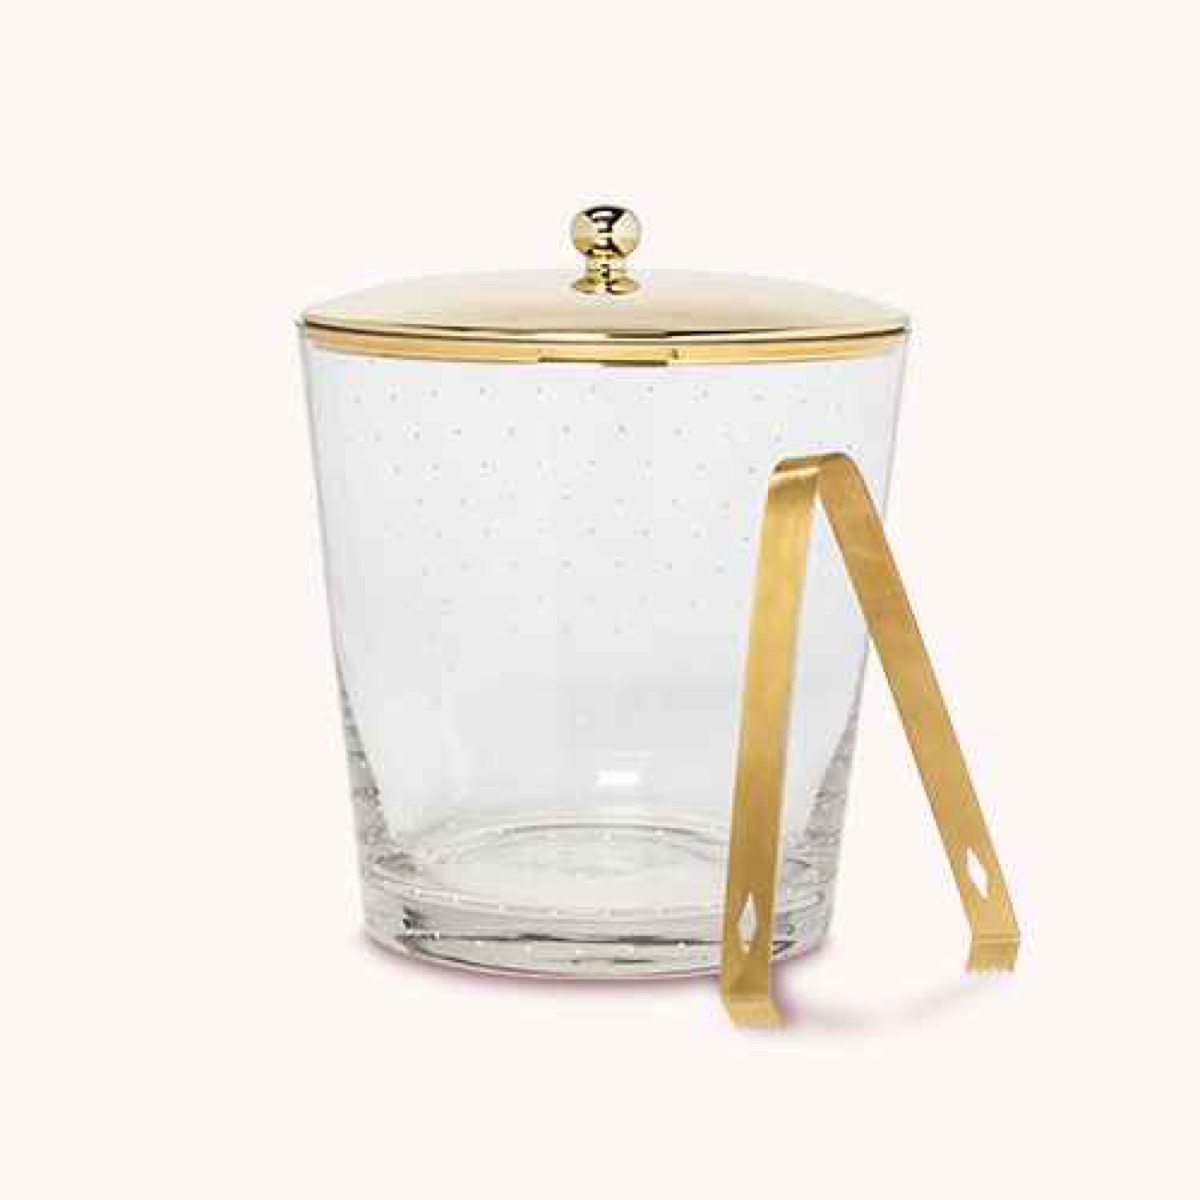 clear ice bucket with gold top and gold tongs